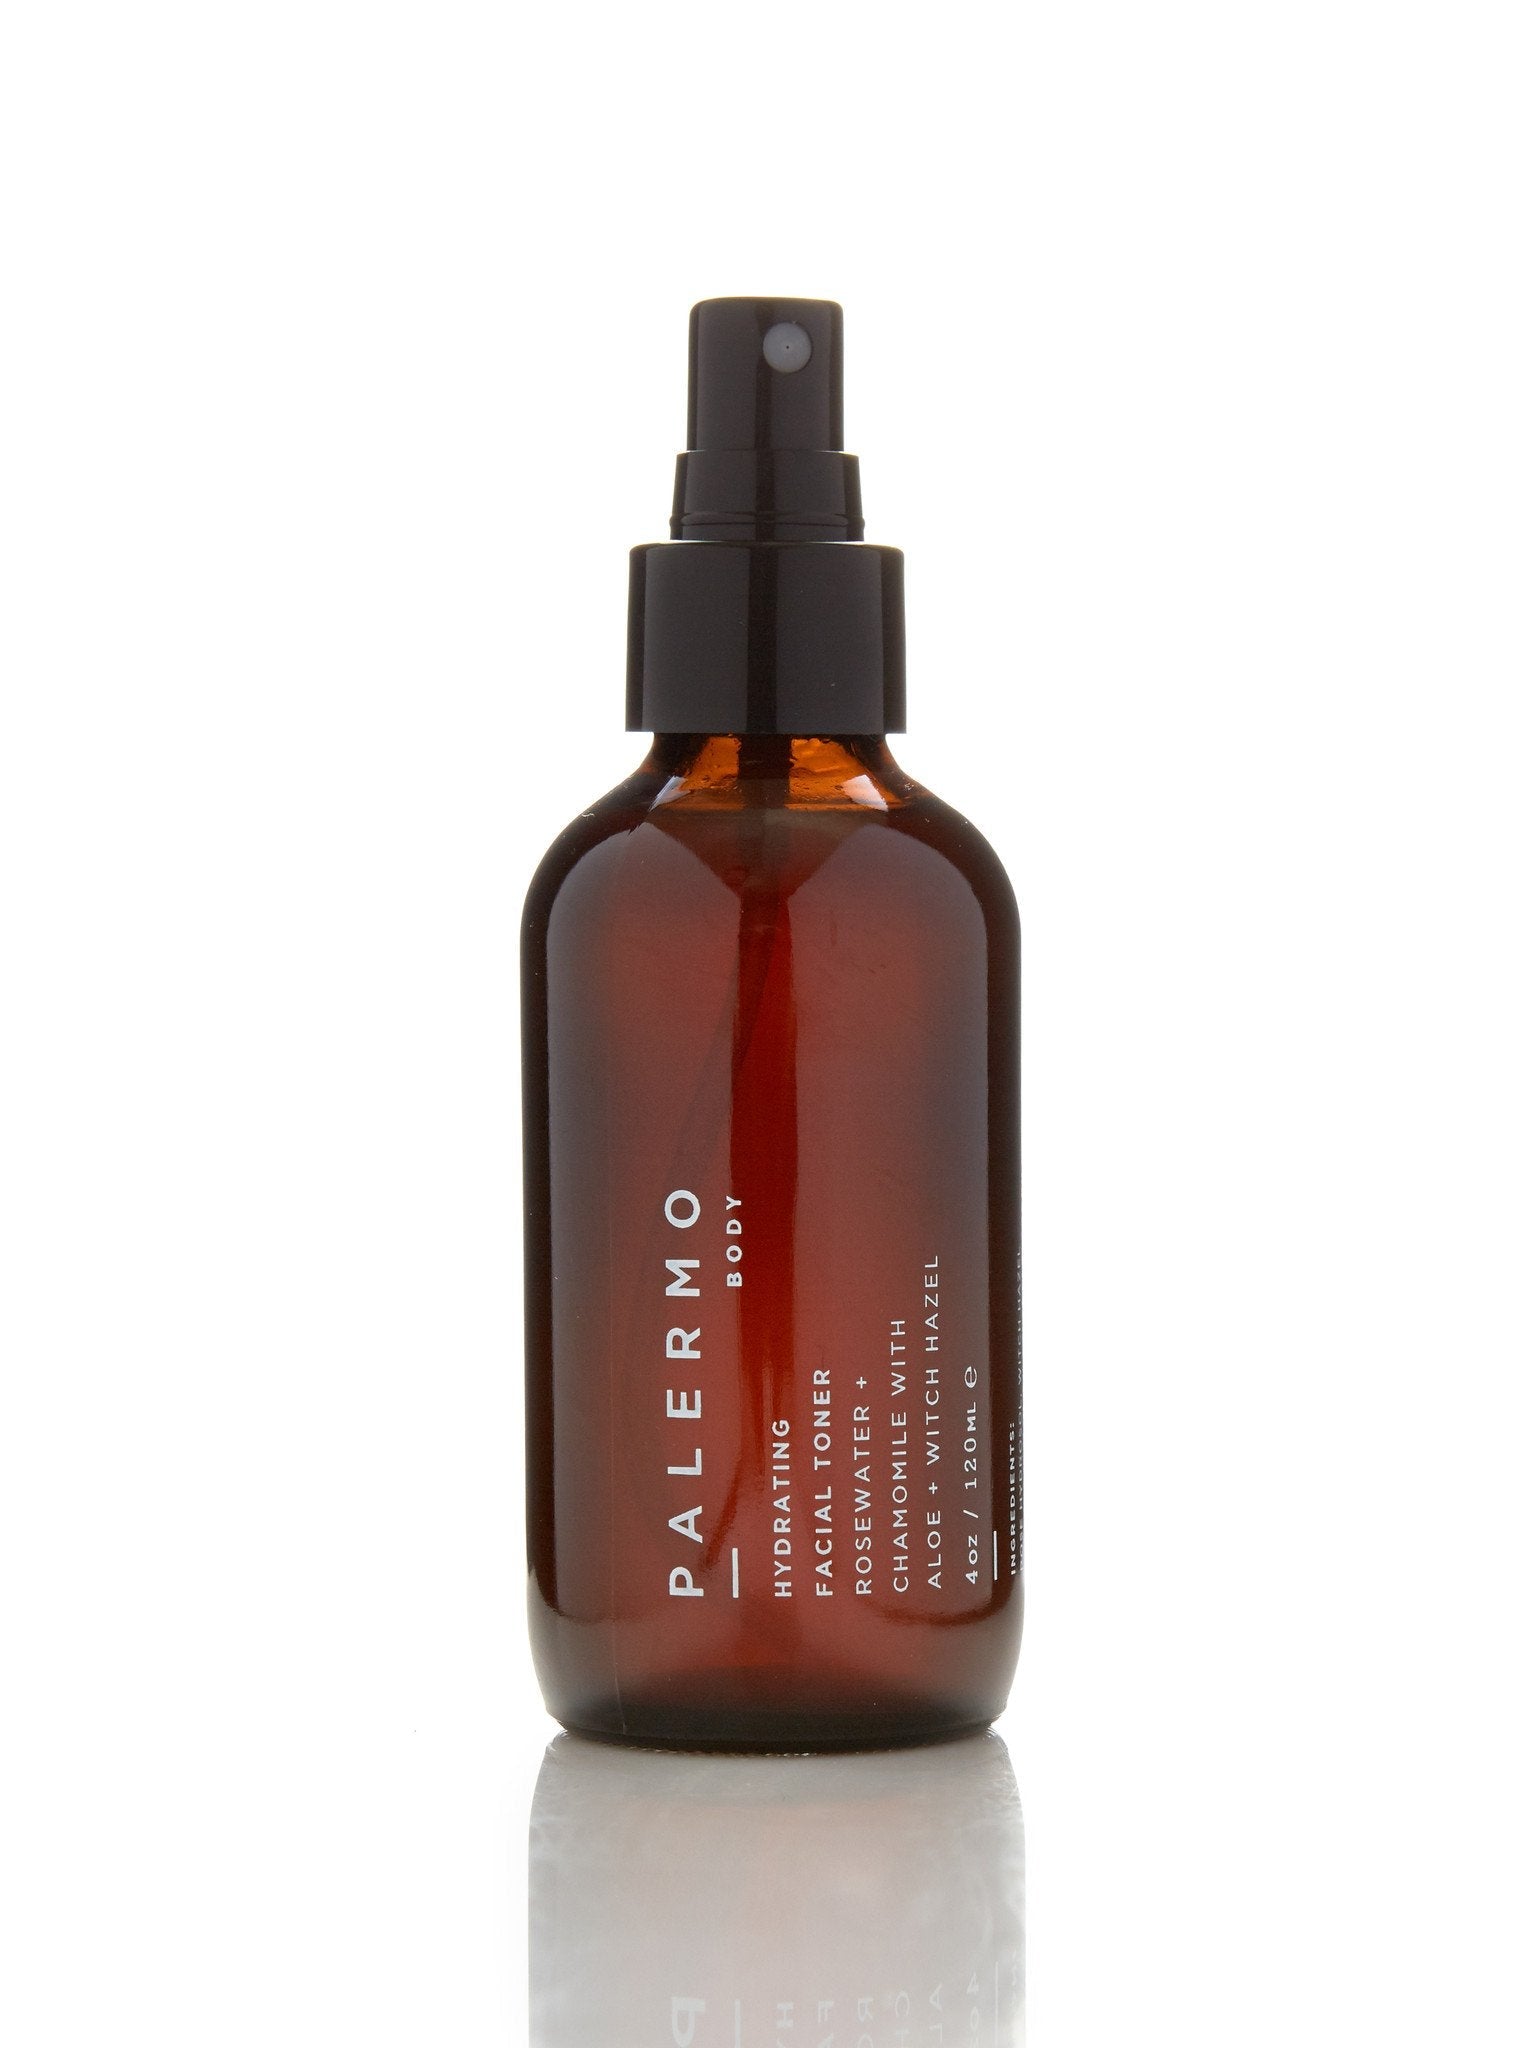 Hydrating Facial Toner by Palermo Body - Lotus and Willow